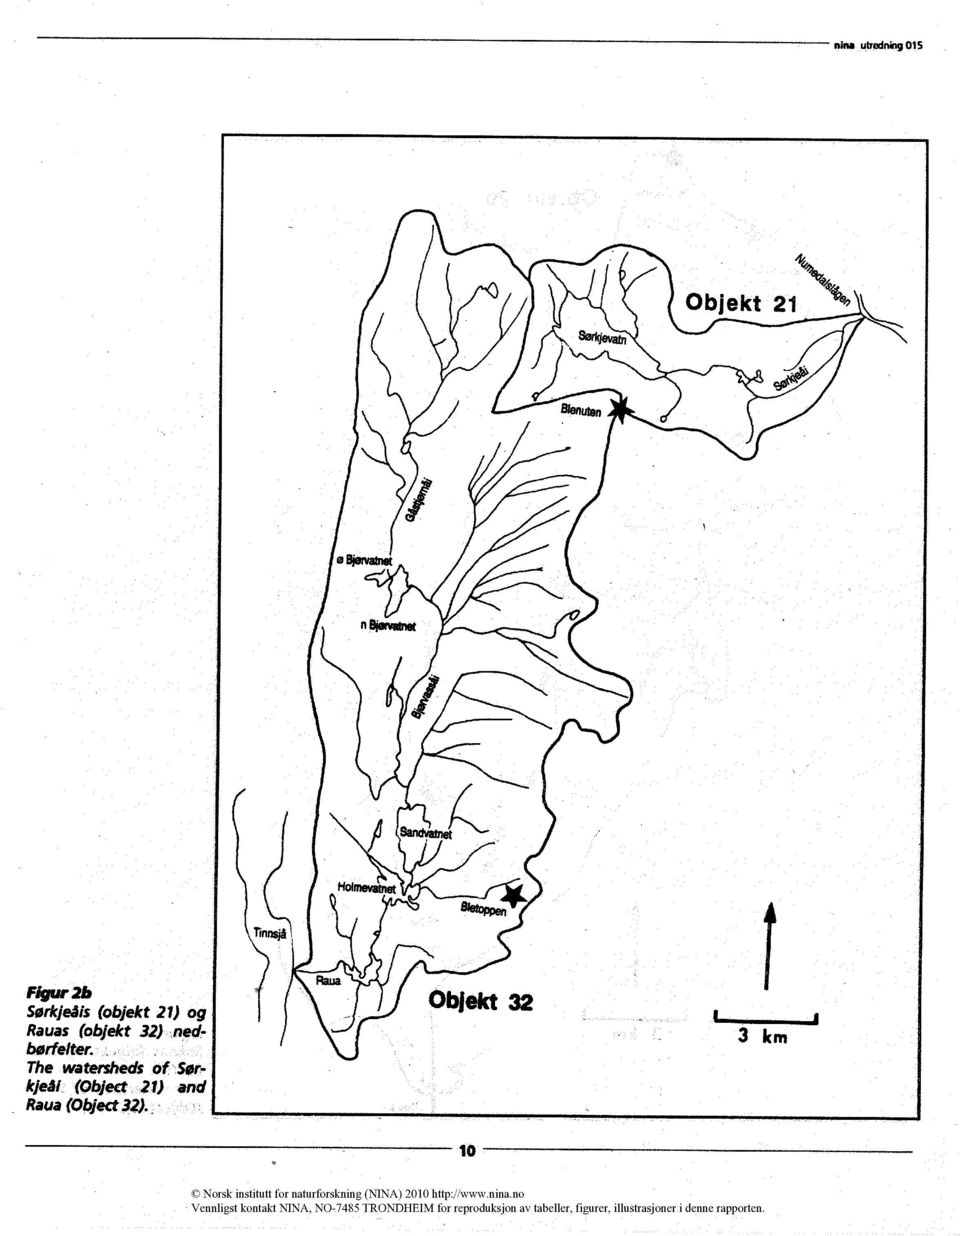 The watersheds of Sørkjeål (Object 21) and Raua (Object 32).